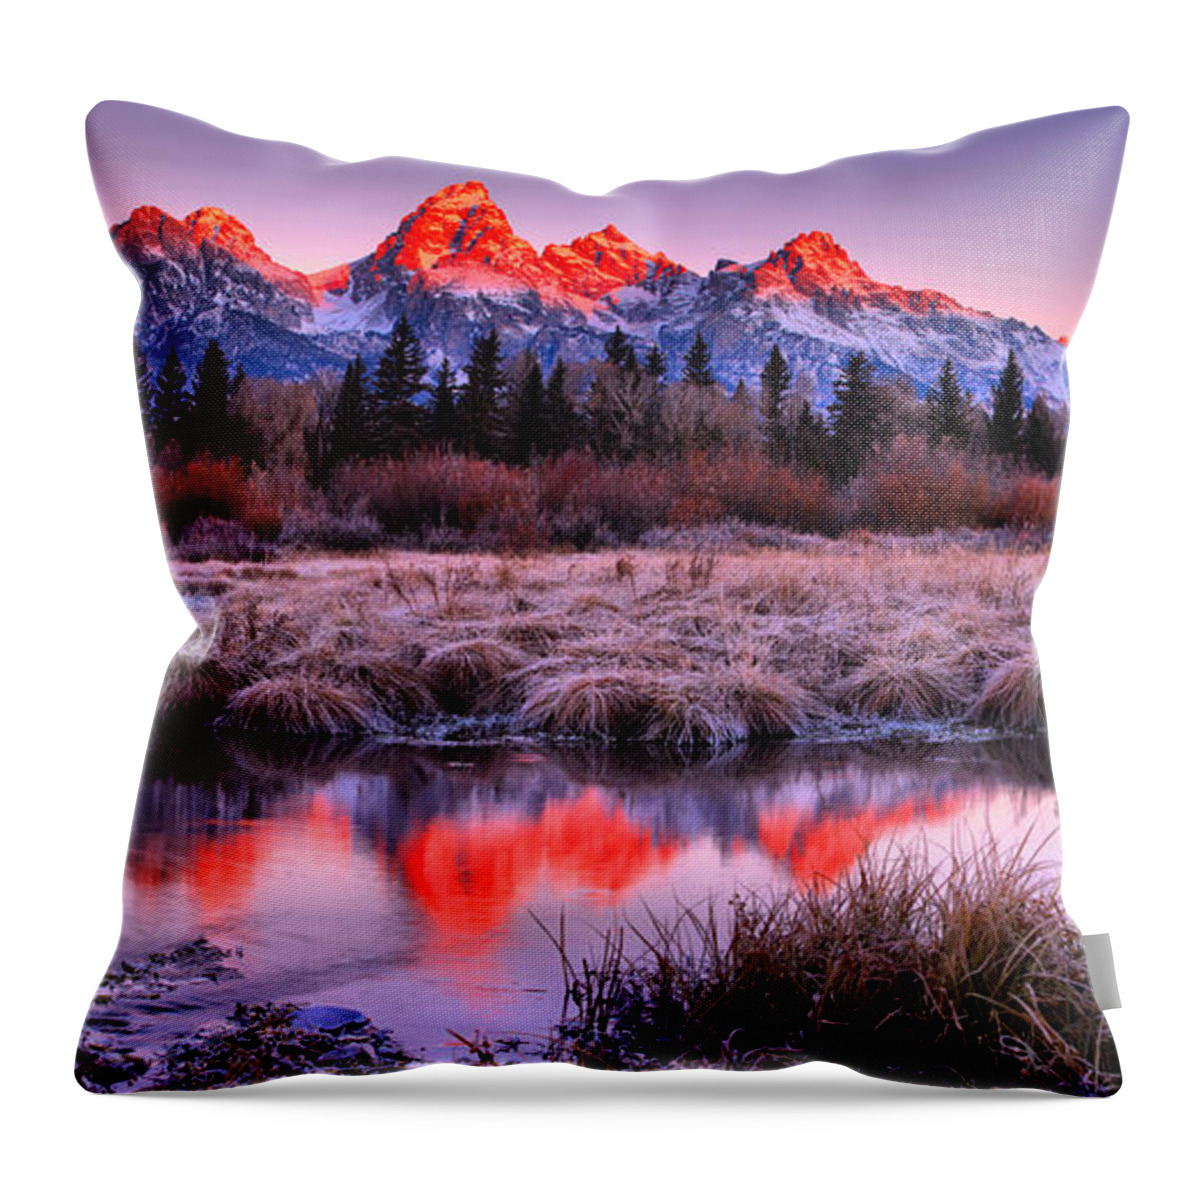 Grand Teton National Park Throw Pillow featuring the photograph Teton Reflections In The Frosted Willows by Adam Jewell